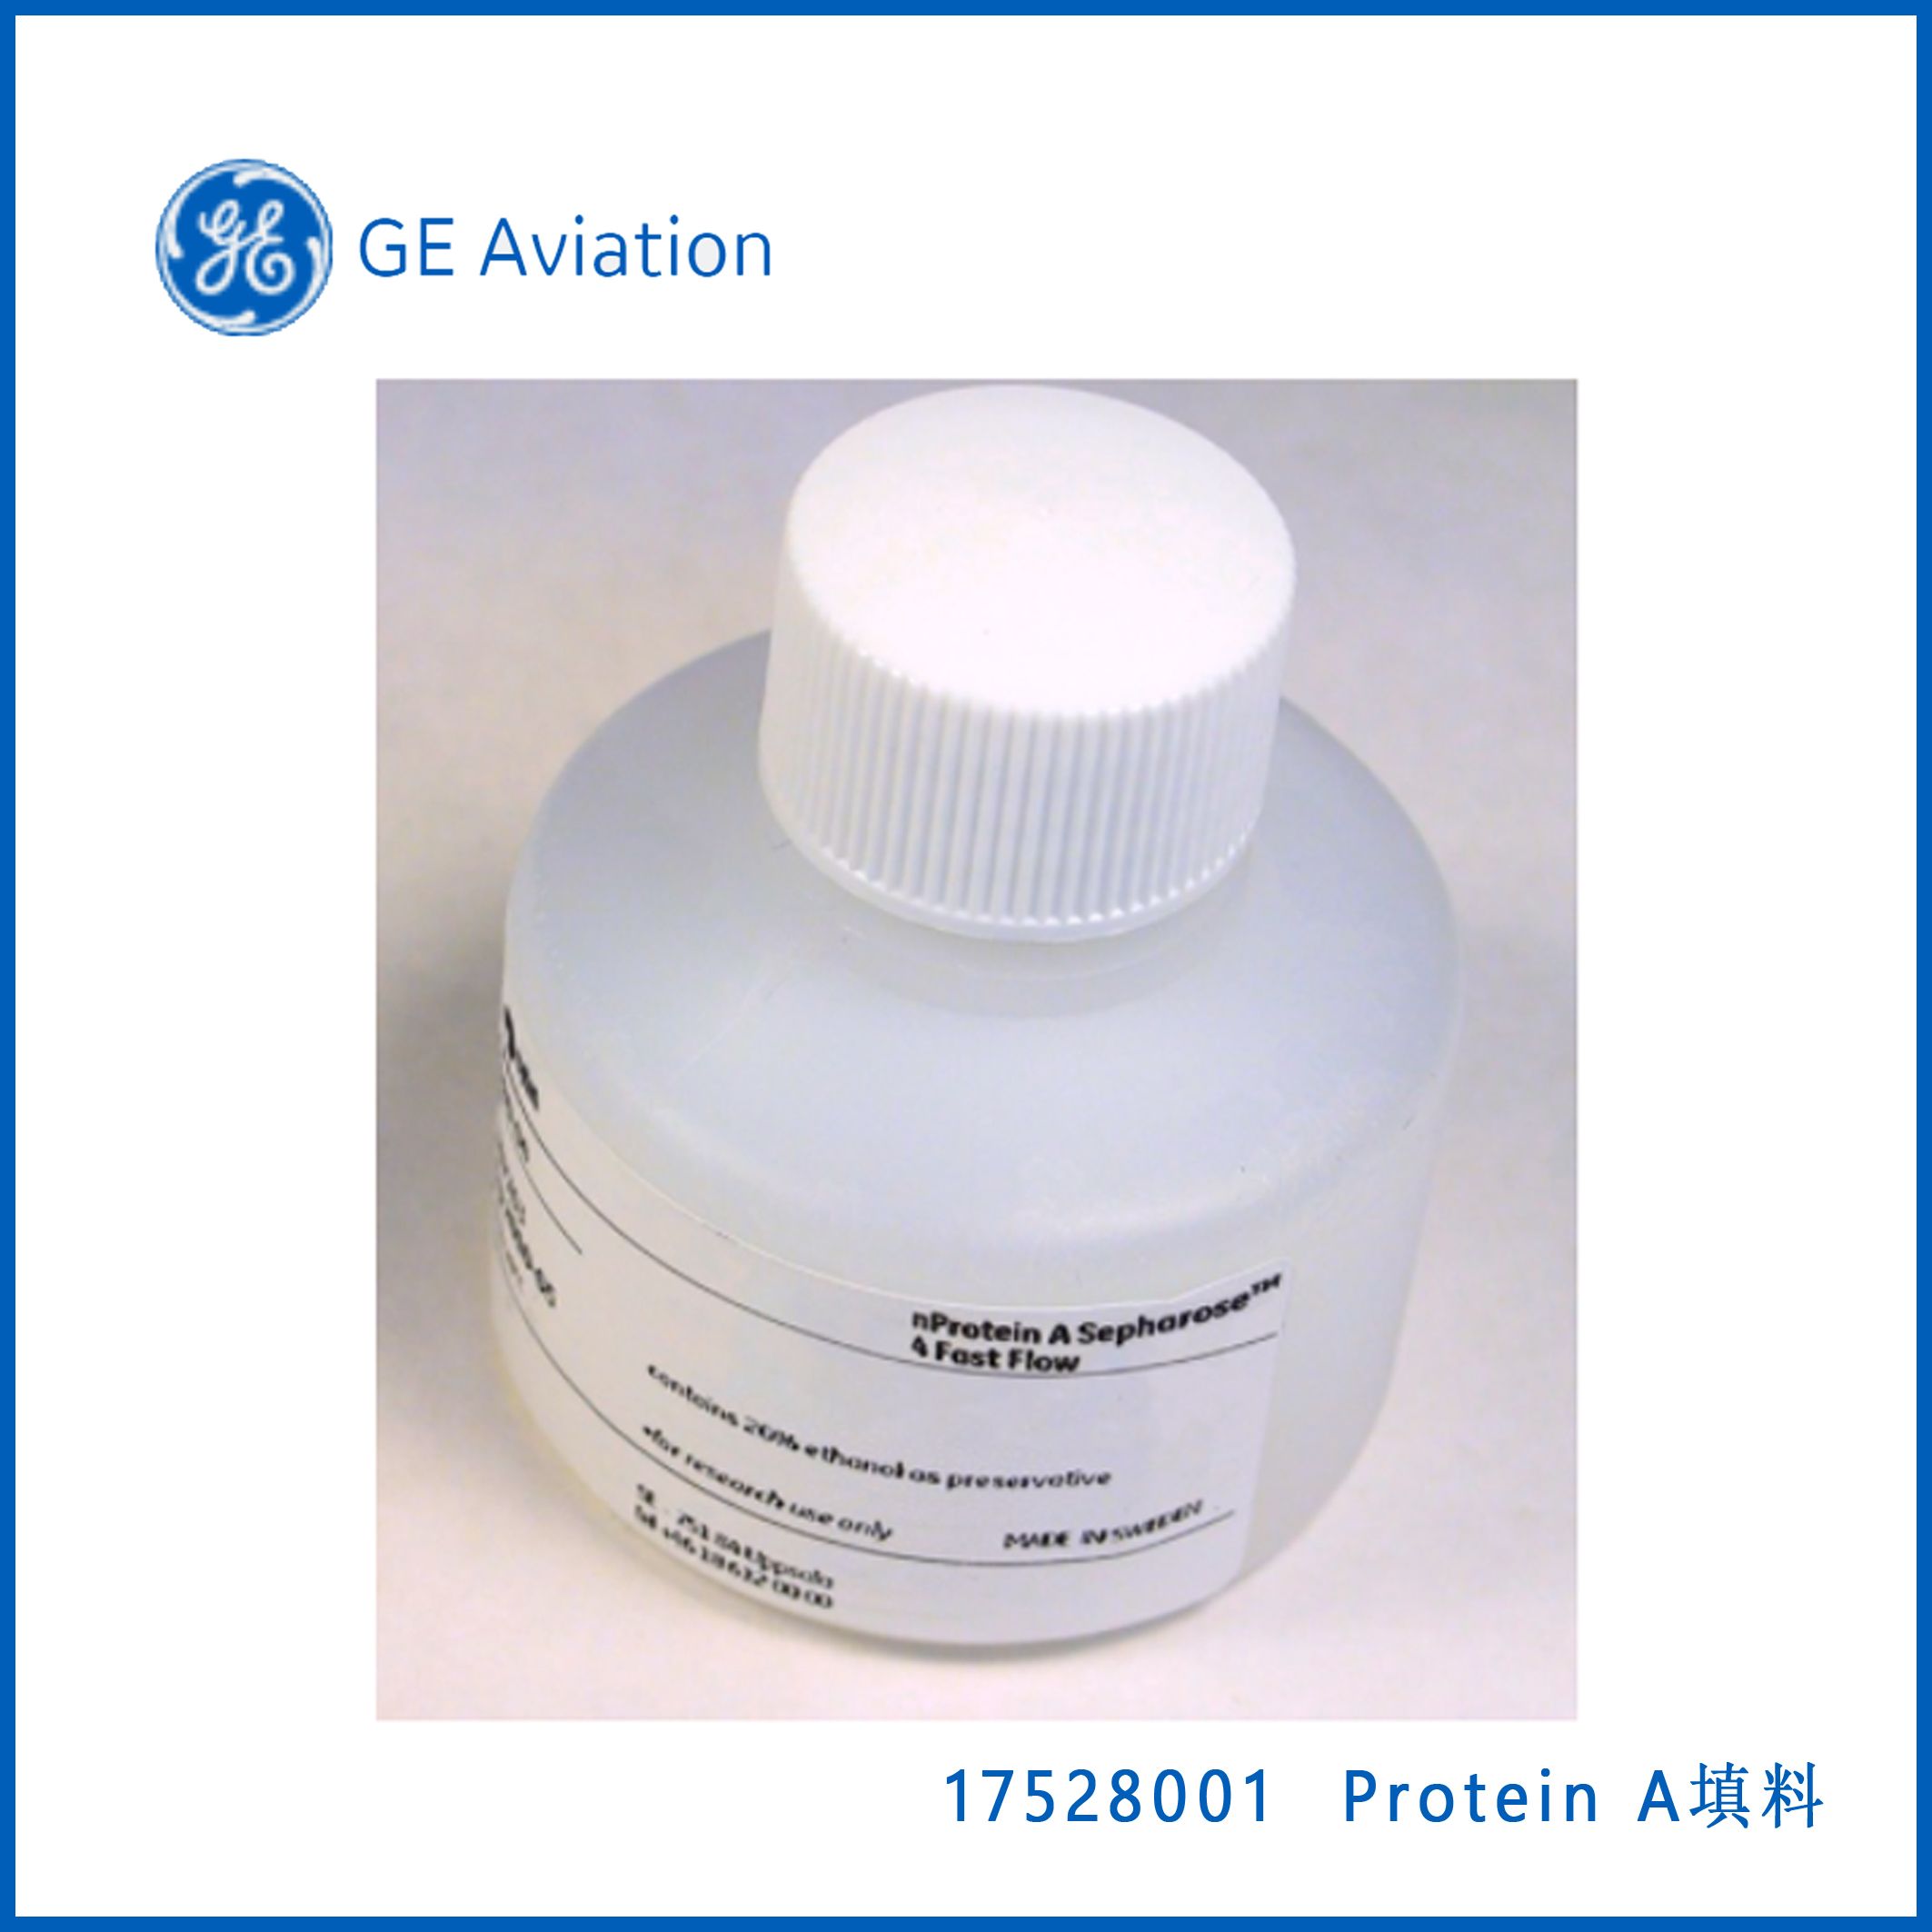 GE17528001nProtein A Sepharose® 4 Fast Flow, Protein A填料，现货